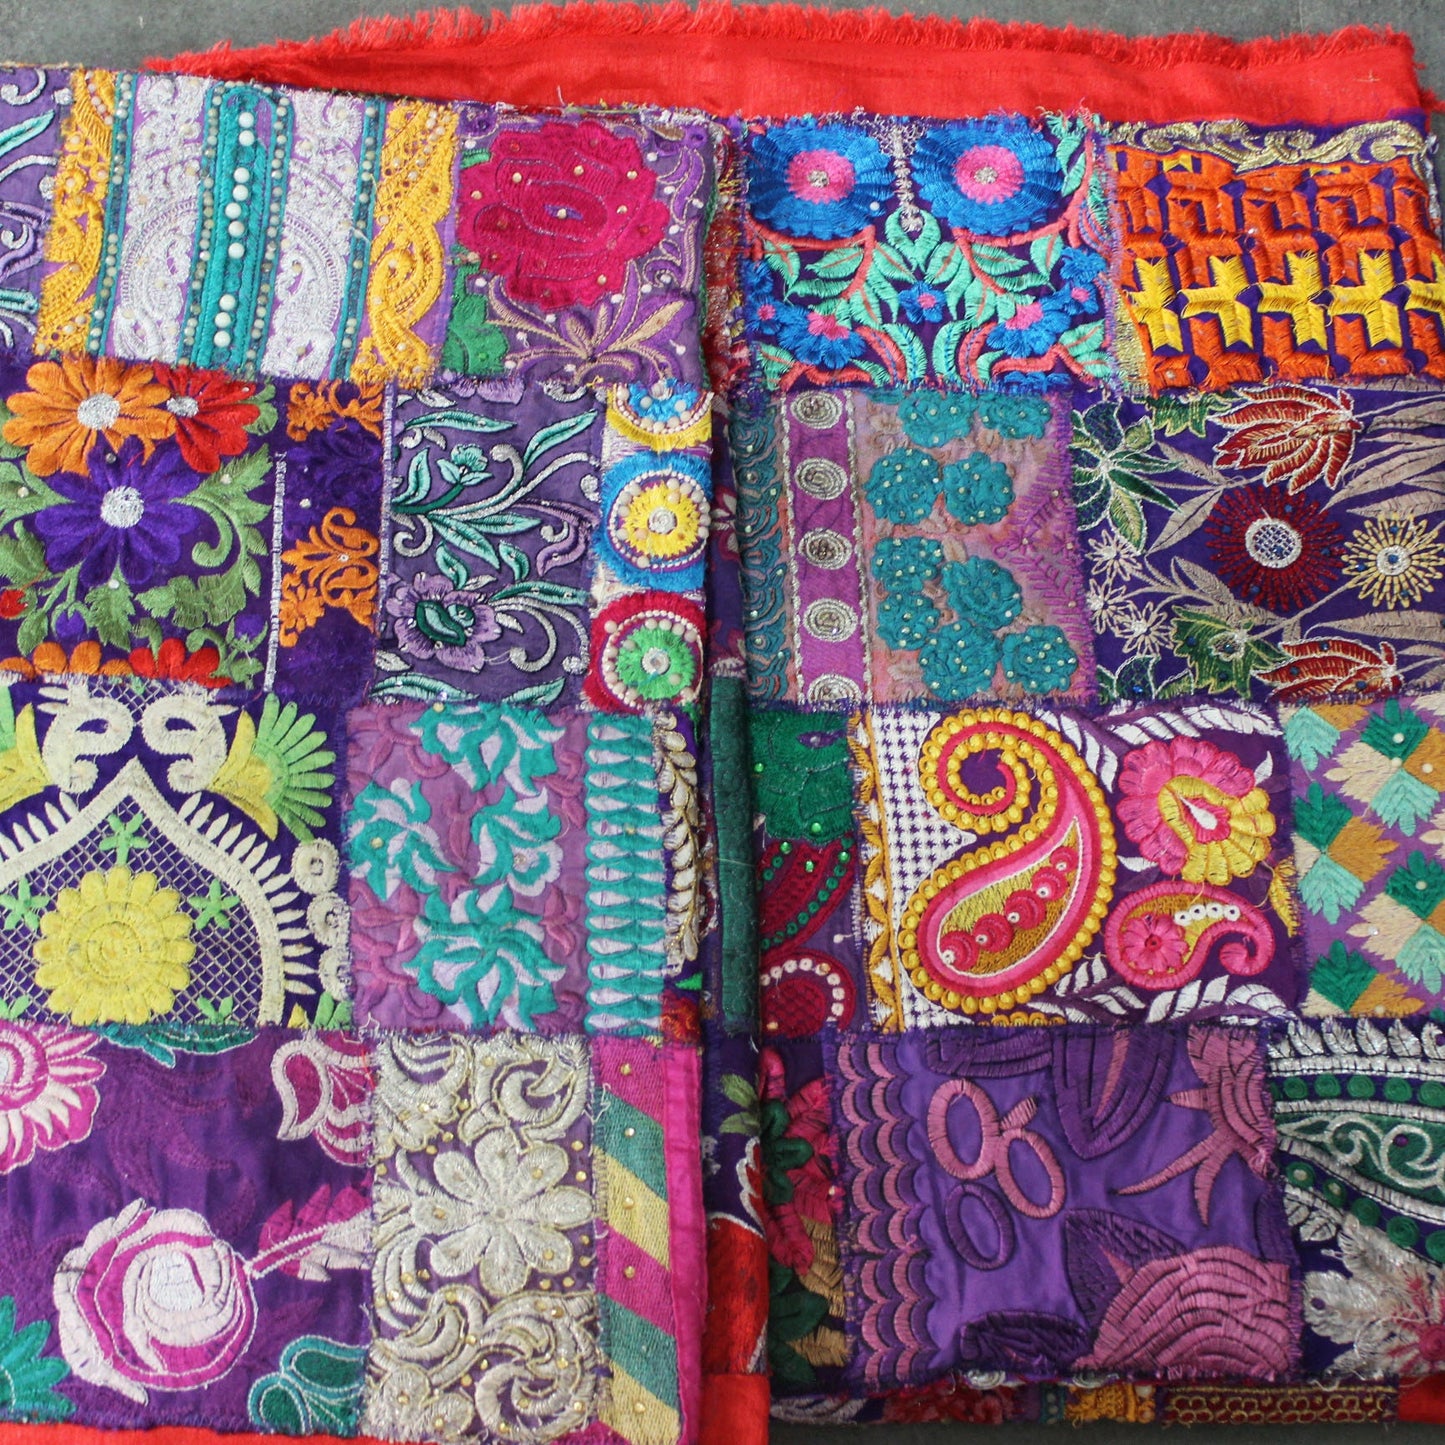 Purple Embellished Fabric By The Yard Embroidered Indian Fabric Boho Indian Textile Fabric Patchwork Vintage Sewing Project Recycled Fabrics